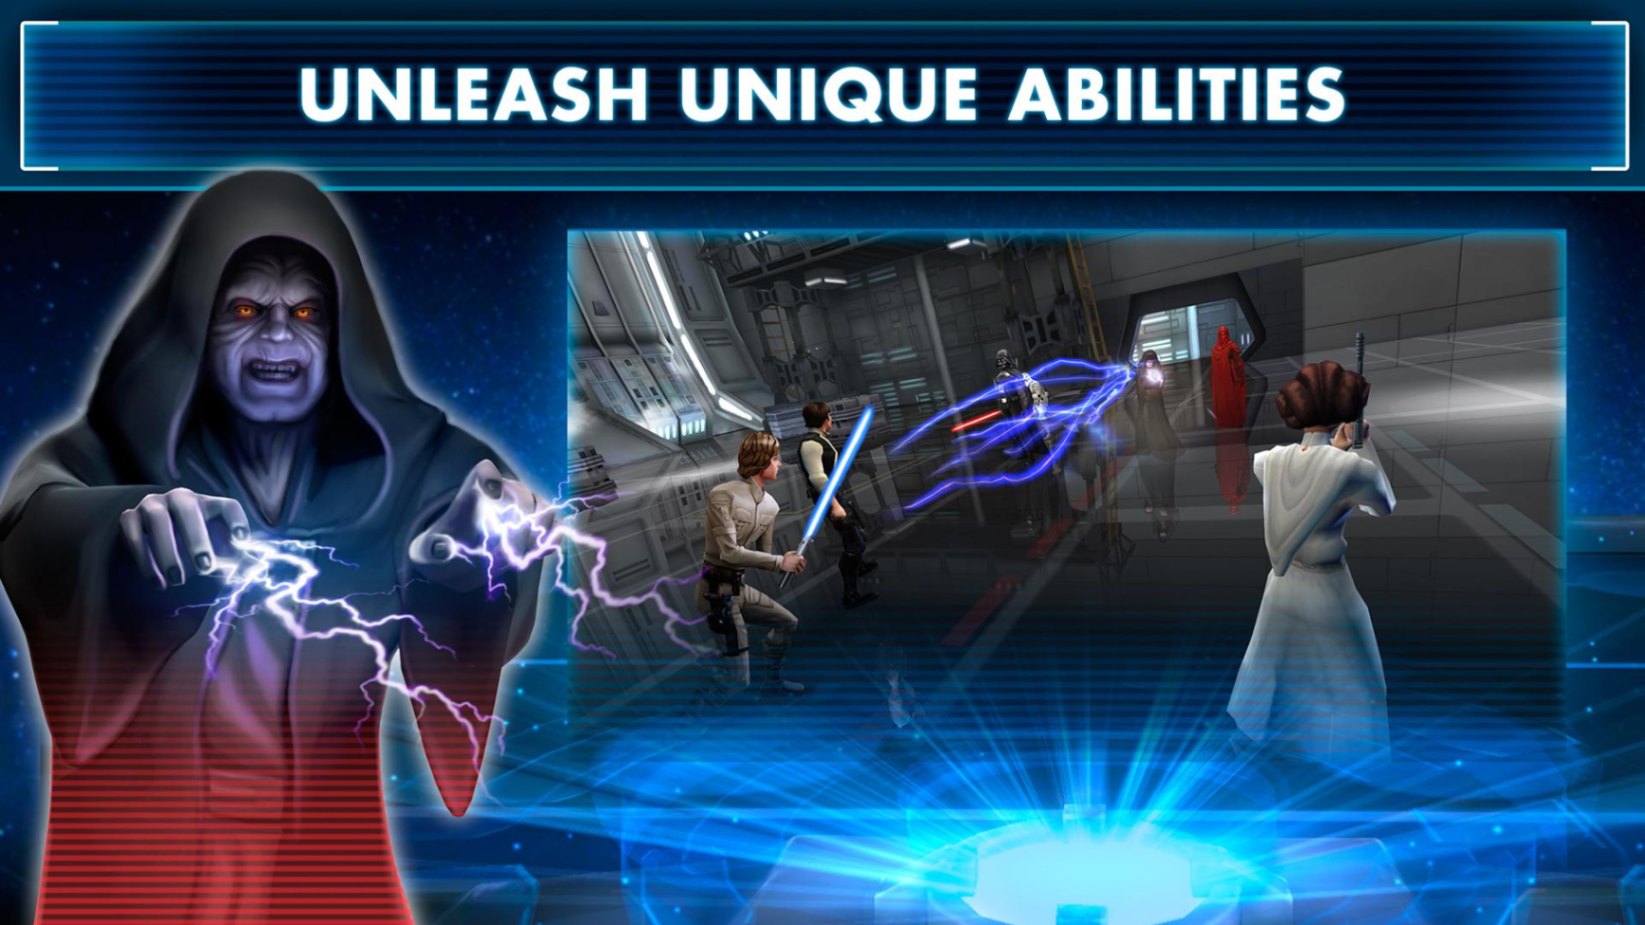 Star Wars™ Galaxy of Heroes - Find Out How to Get the Best Characters, Tips and More